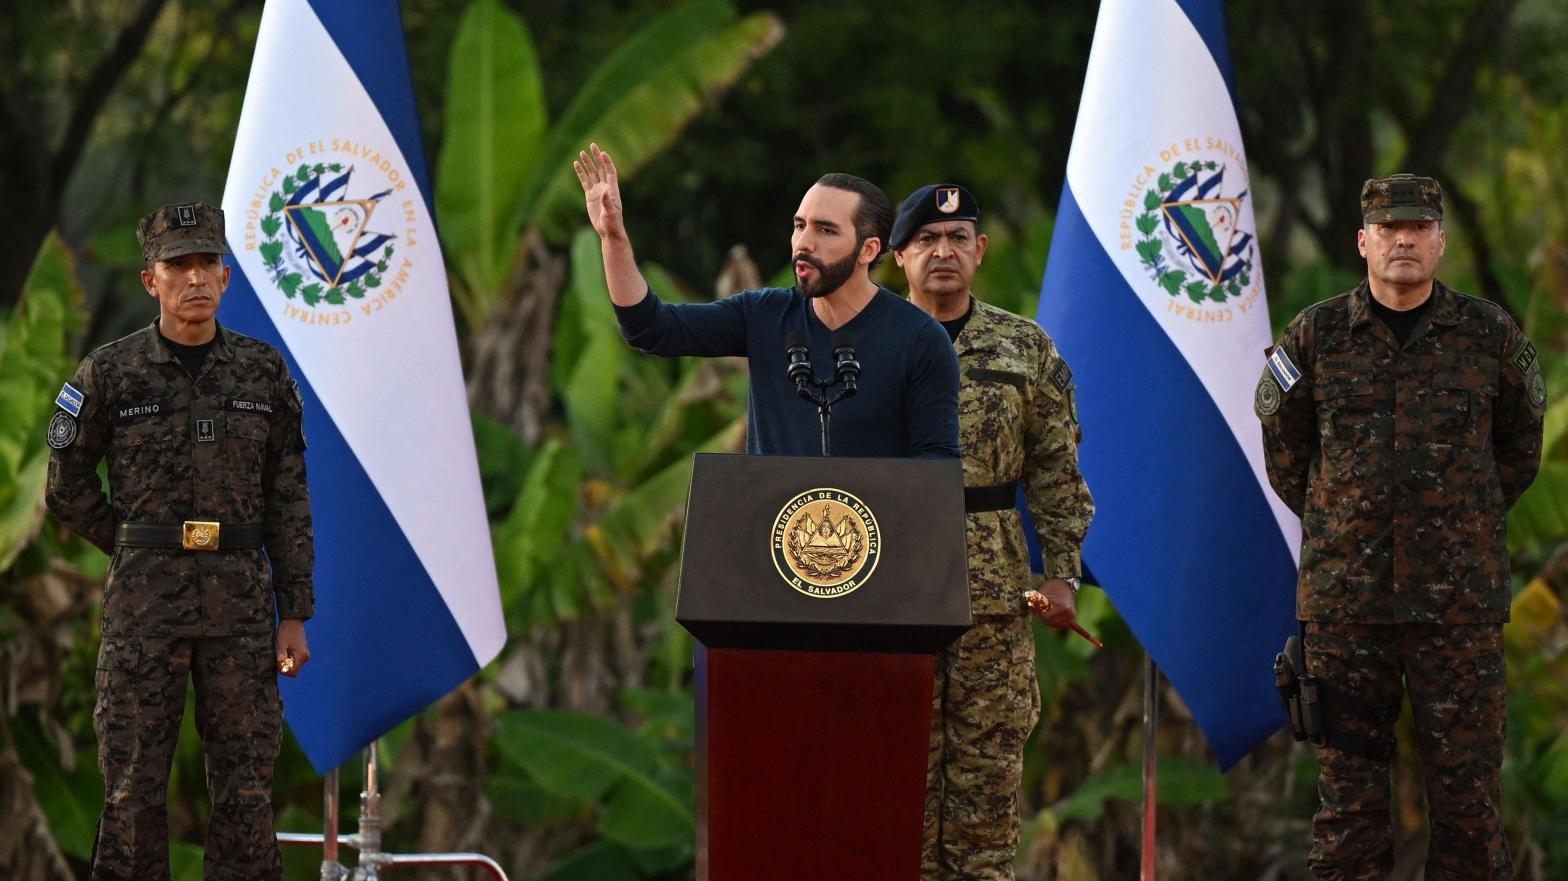 El Salvador's President Nayib Bukele has proved his dislike of journalists in the past, and a report from this year showed his government used Pegasus spyware to infect reporters' phones. (Photo: MARVIN RECINOS/AF, Getty Images)